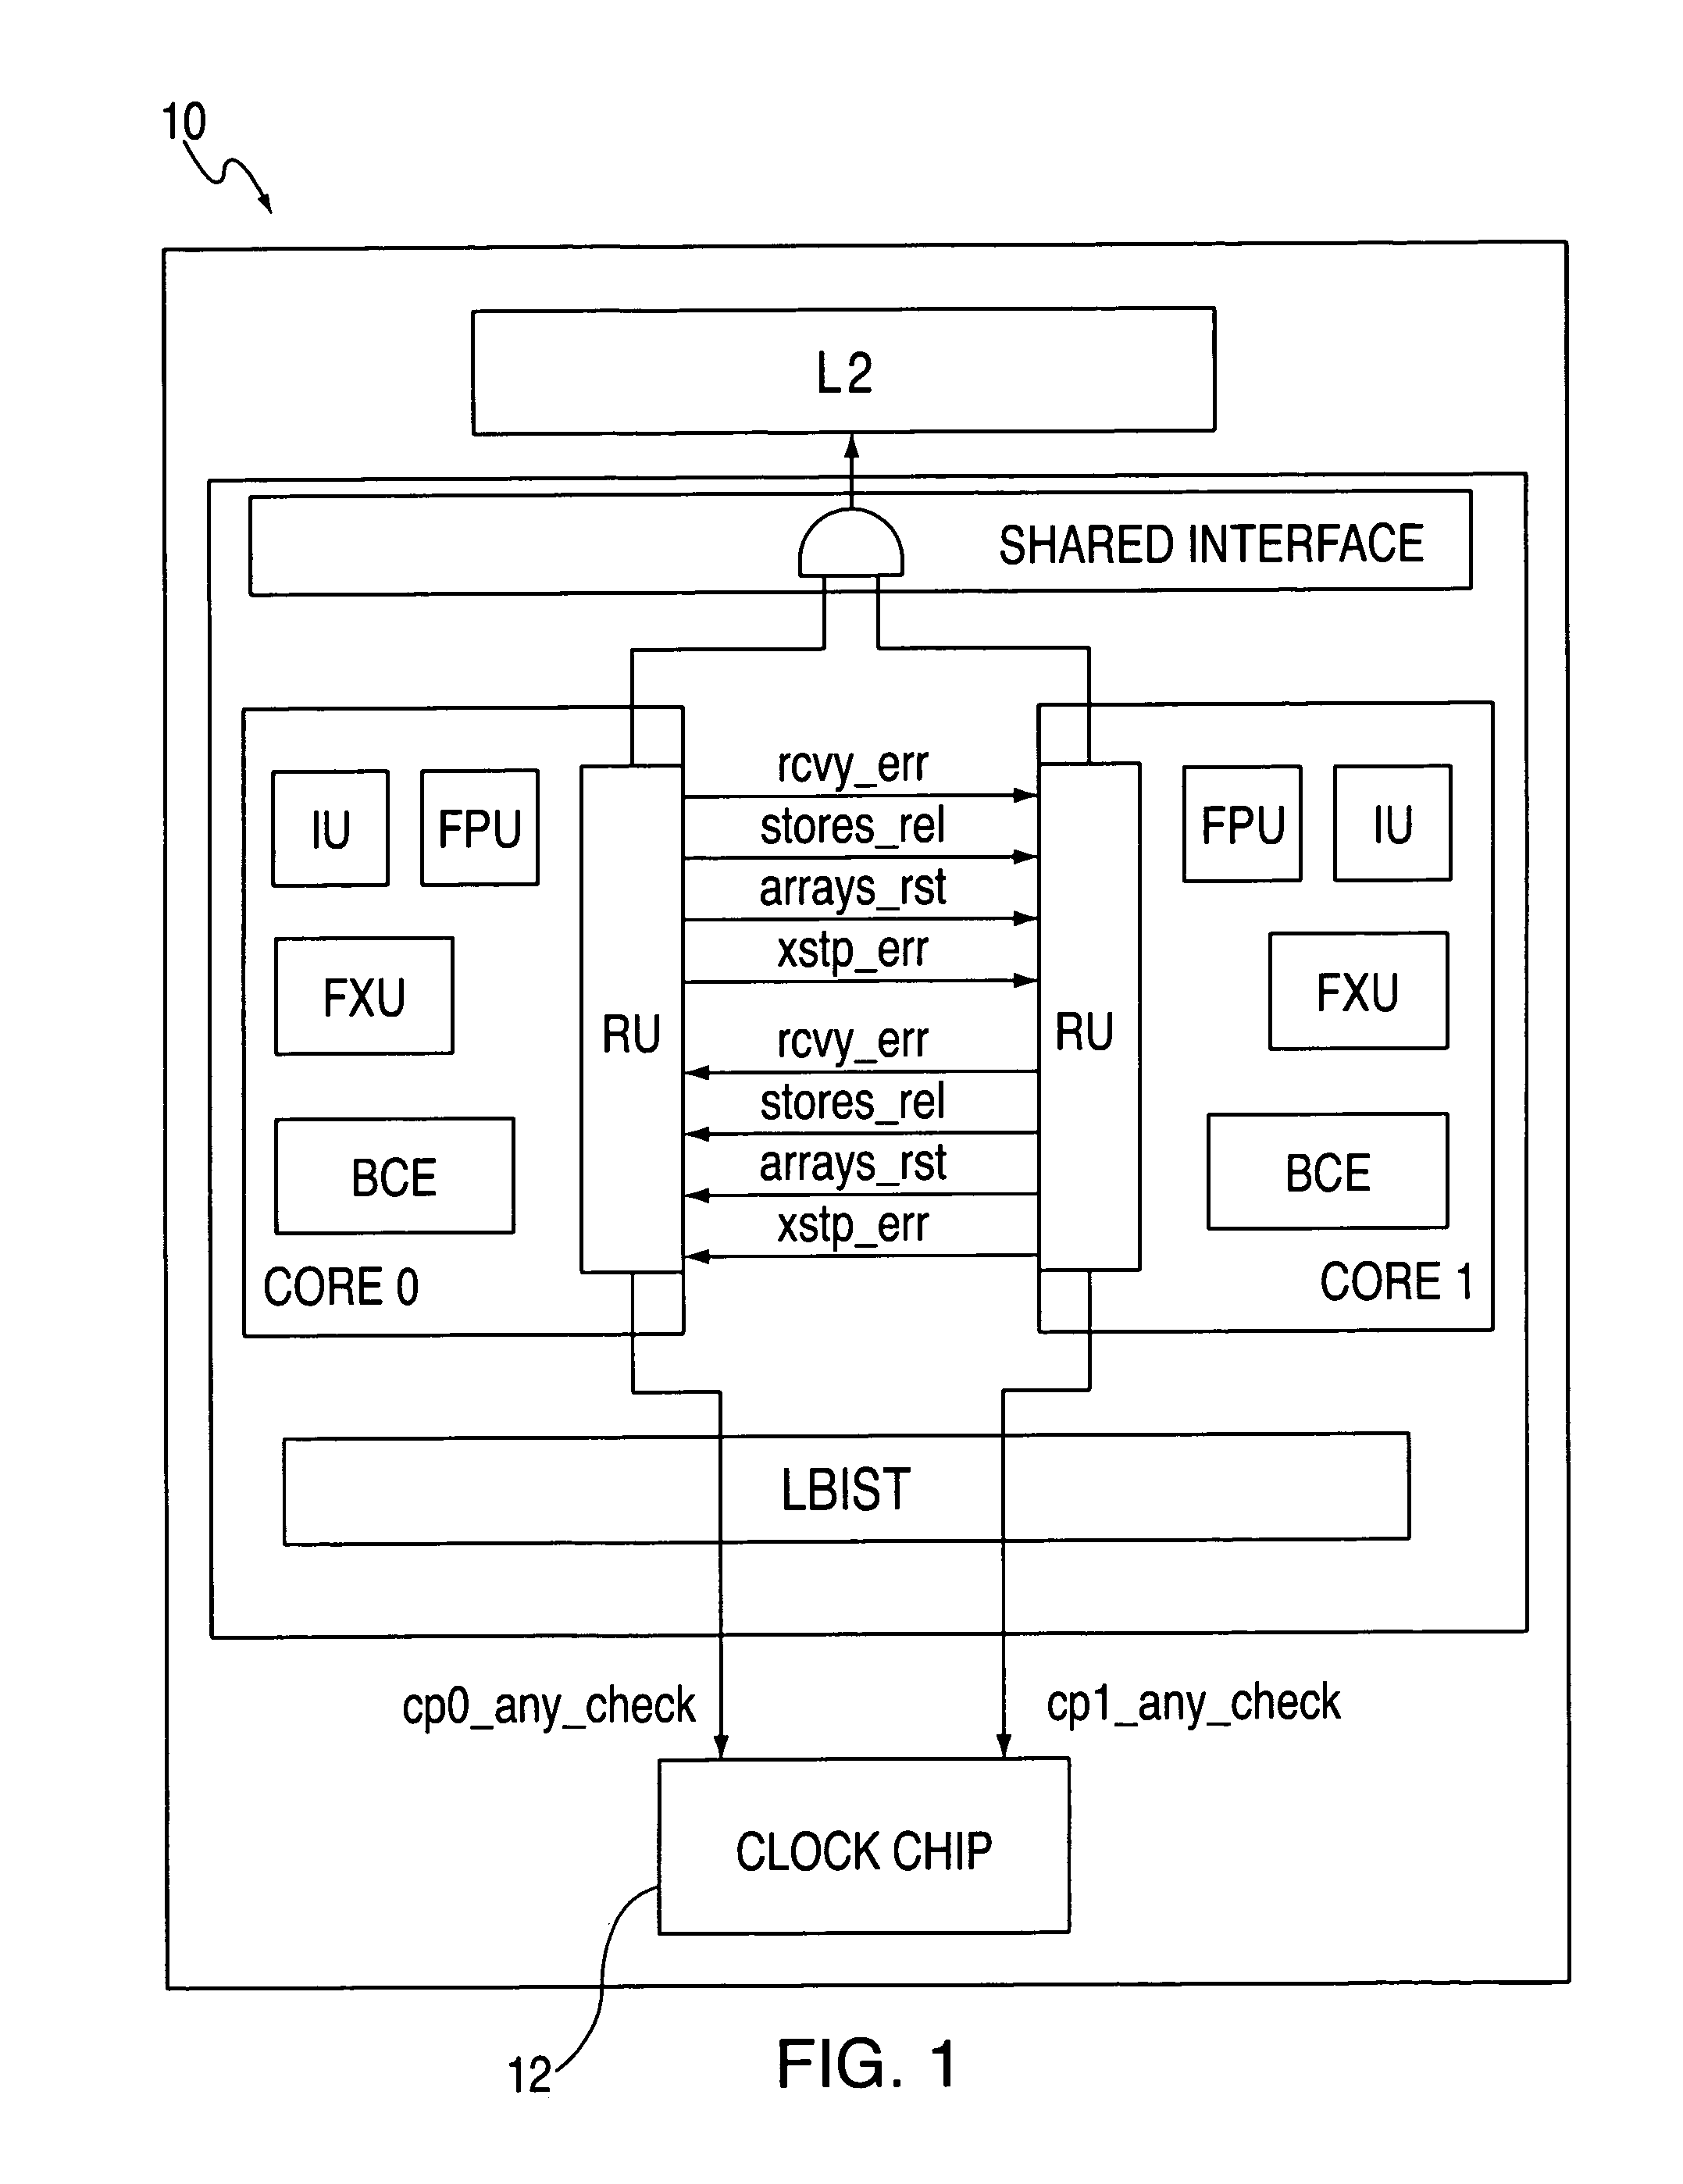 System and method for providing processor recovery in a multi-core system